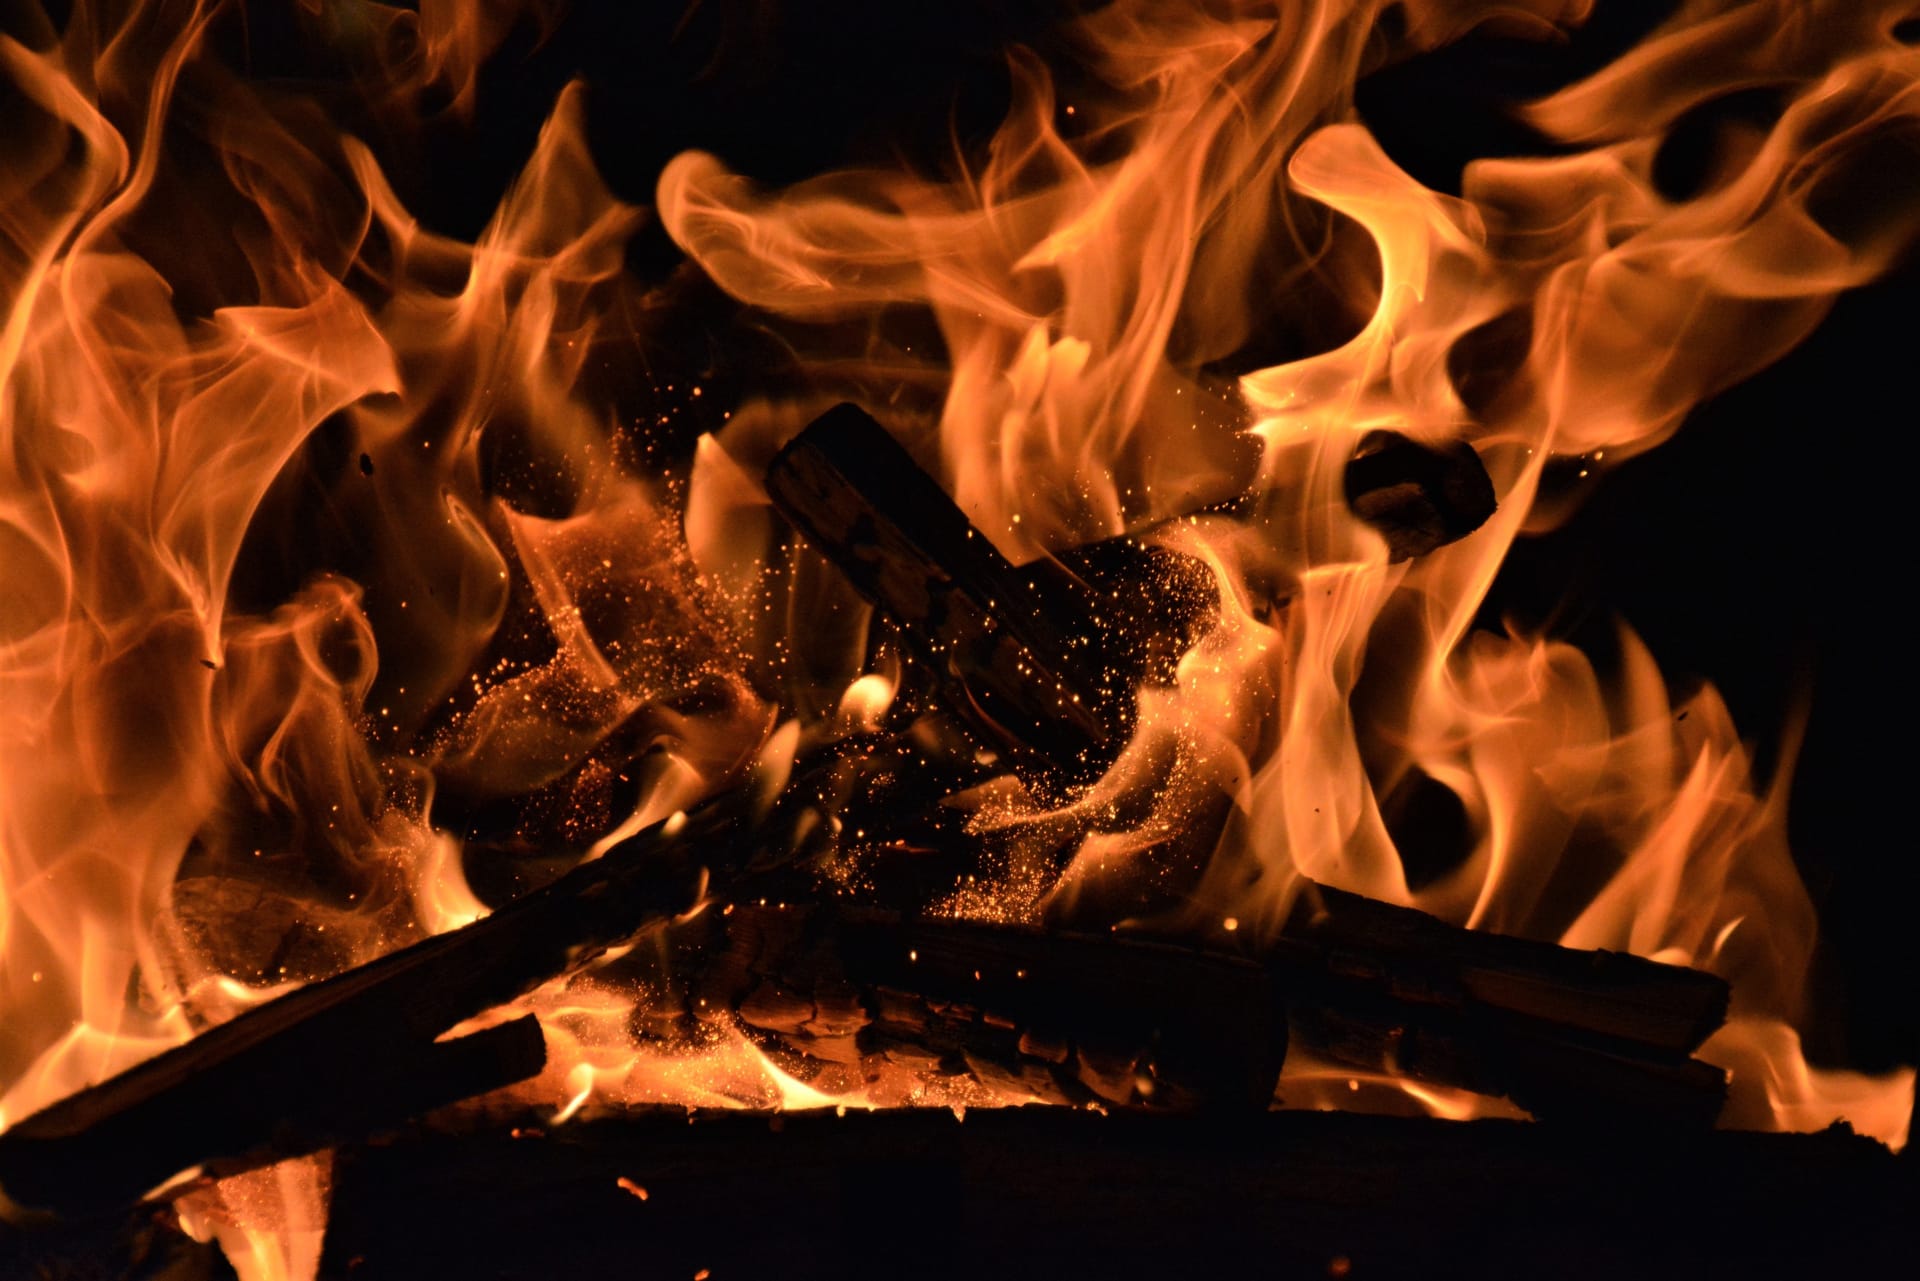 A pile of burning wood flames